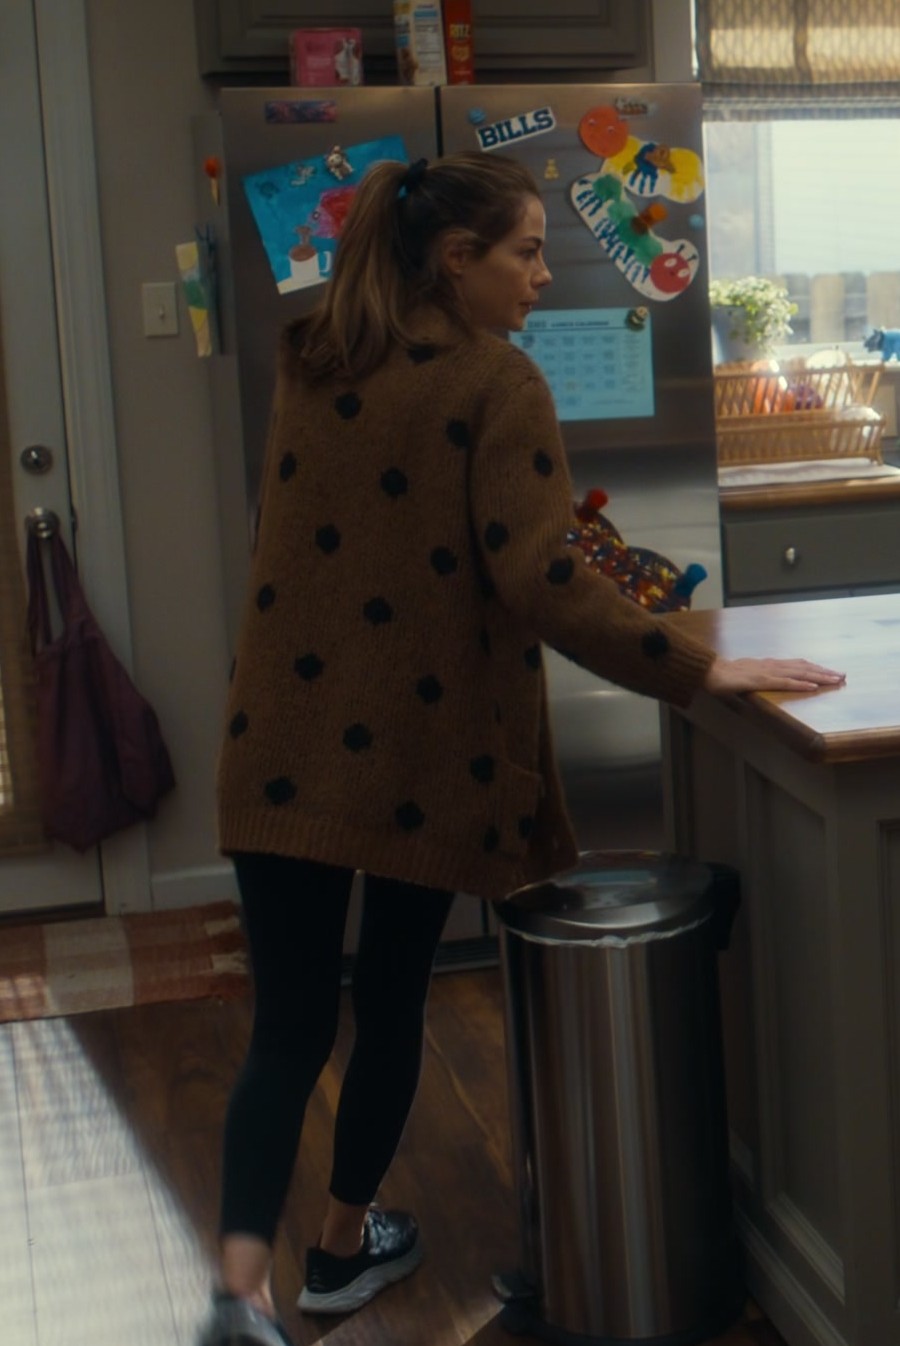 Worn on The Family Plan (2023) Movie - Mohair Polka Dot V-Neck Cardigan Worn by Michelle Monaghan as Jessica Morgan